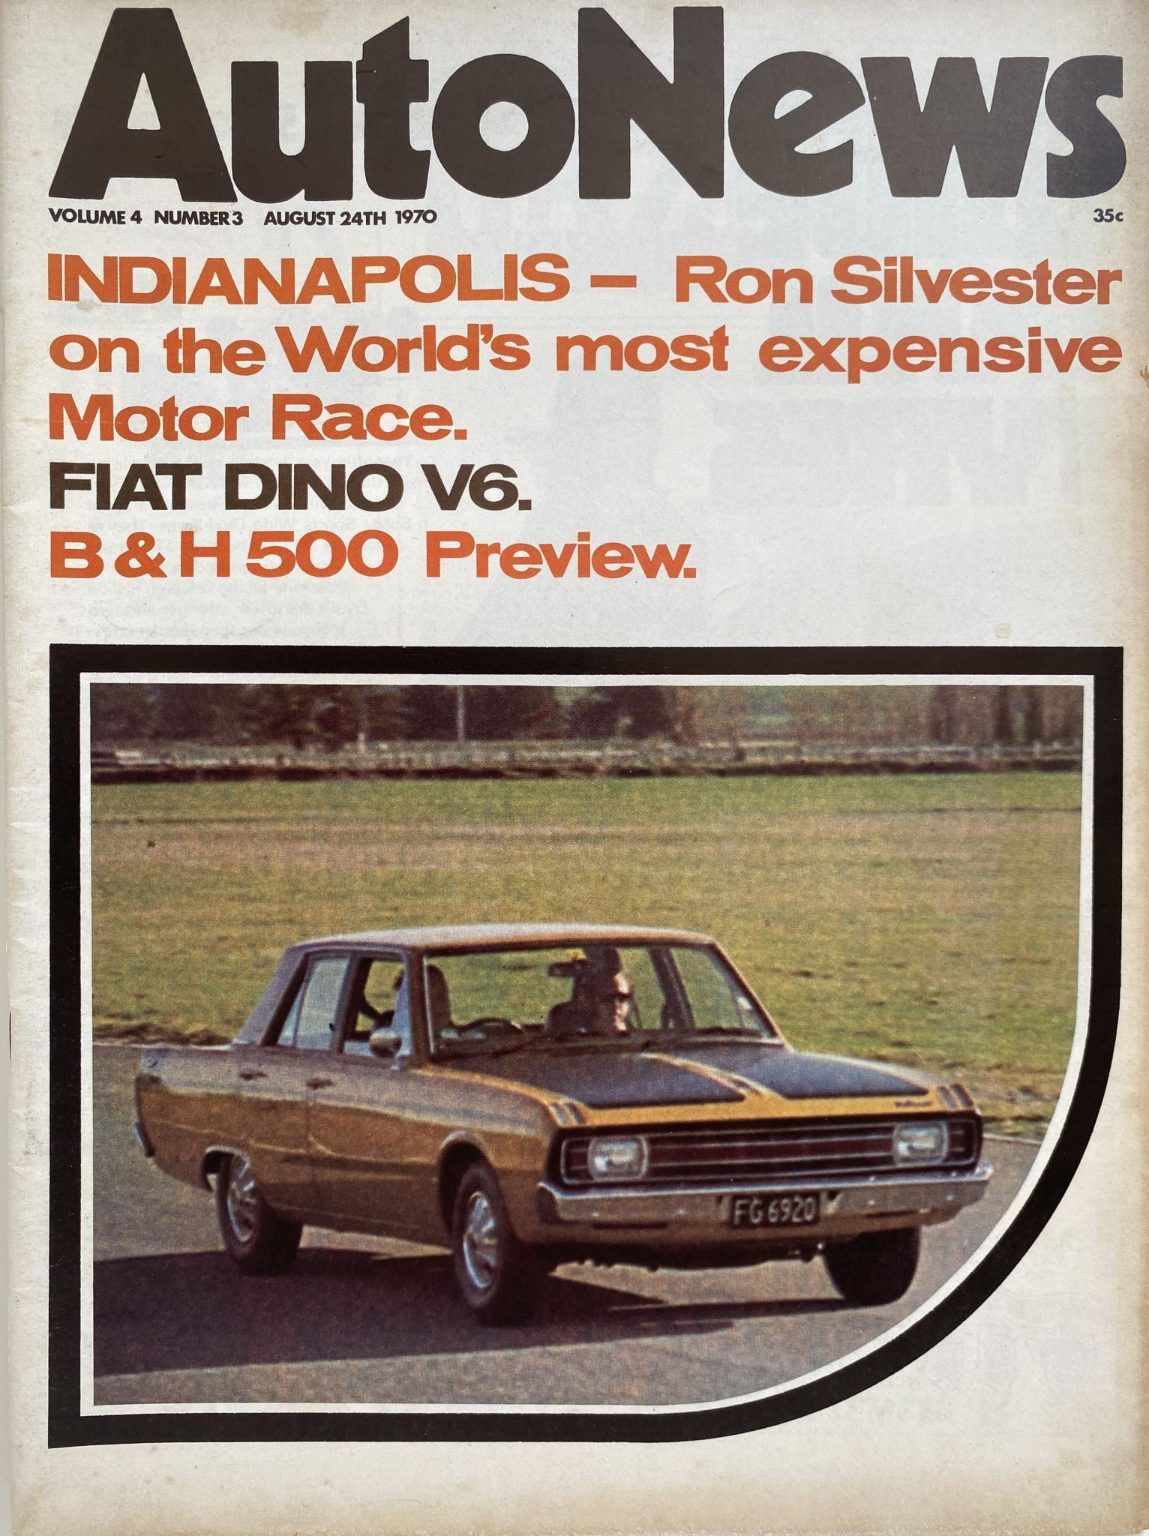 OLD MAGAZINE: Auto News - Vol. 4, Number 3, 24th August 1970